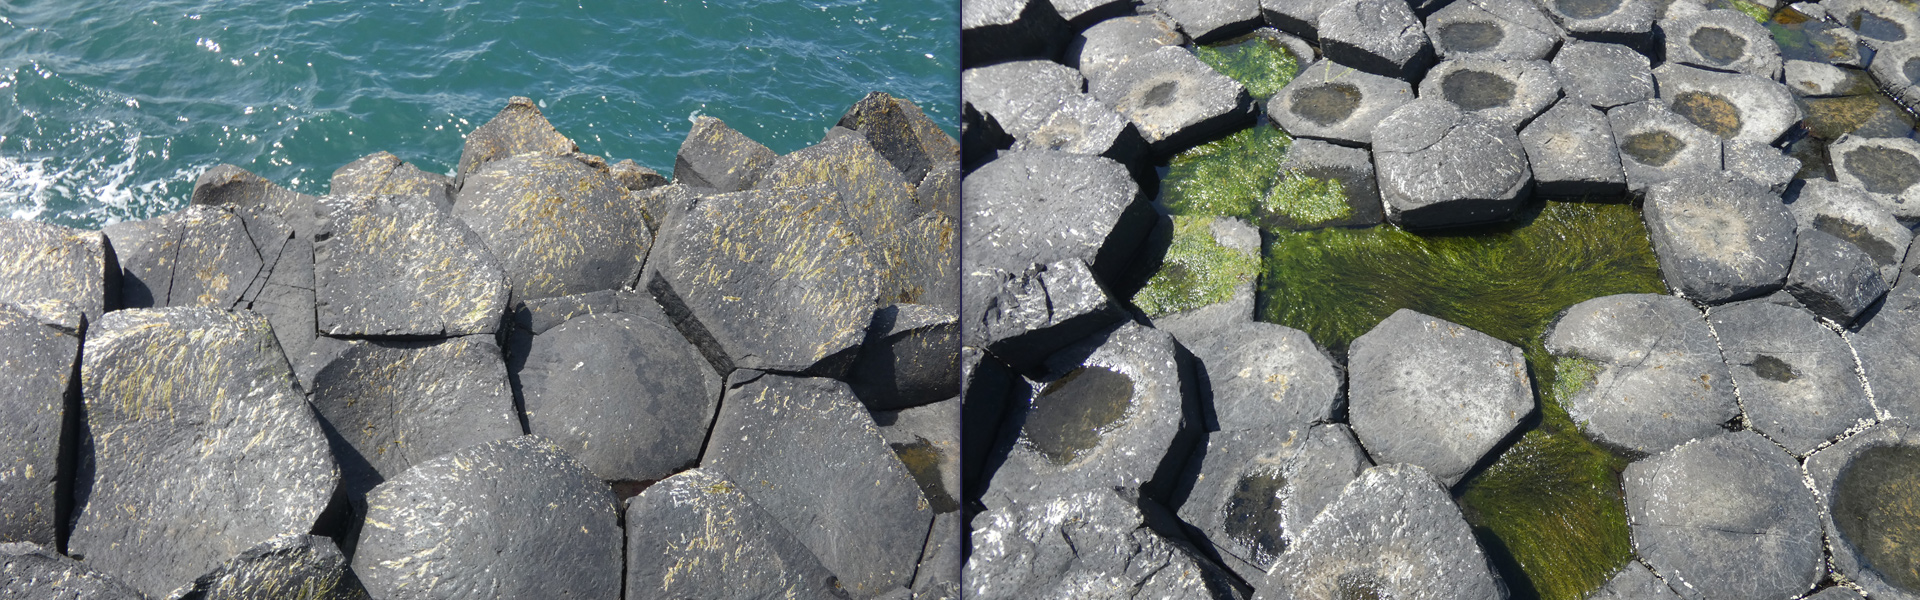 Two photos of the Giant's Causeway in Northern Ireland